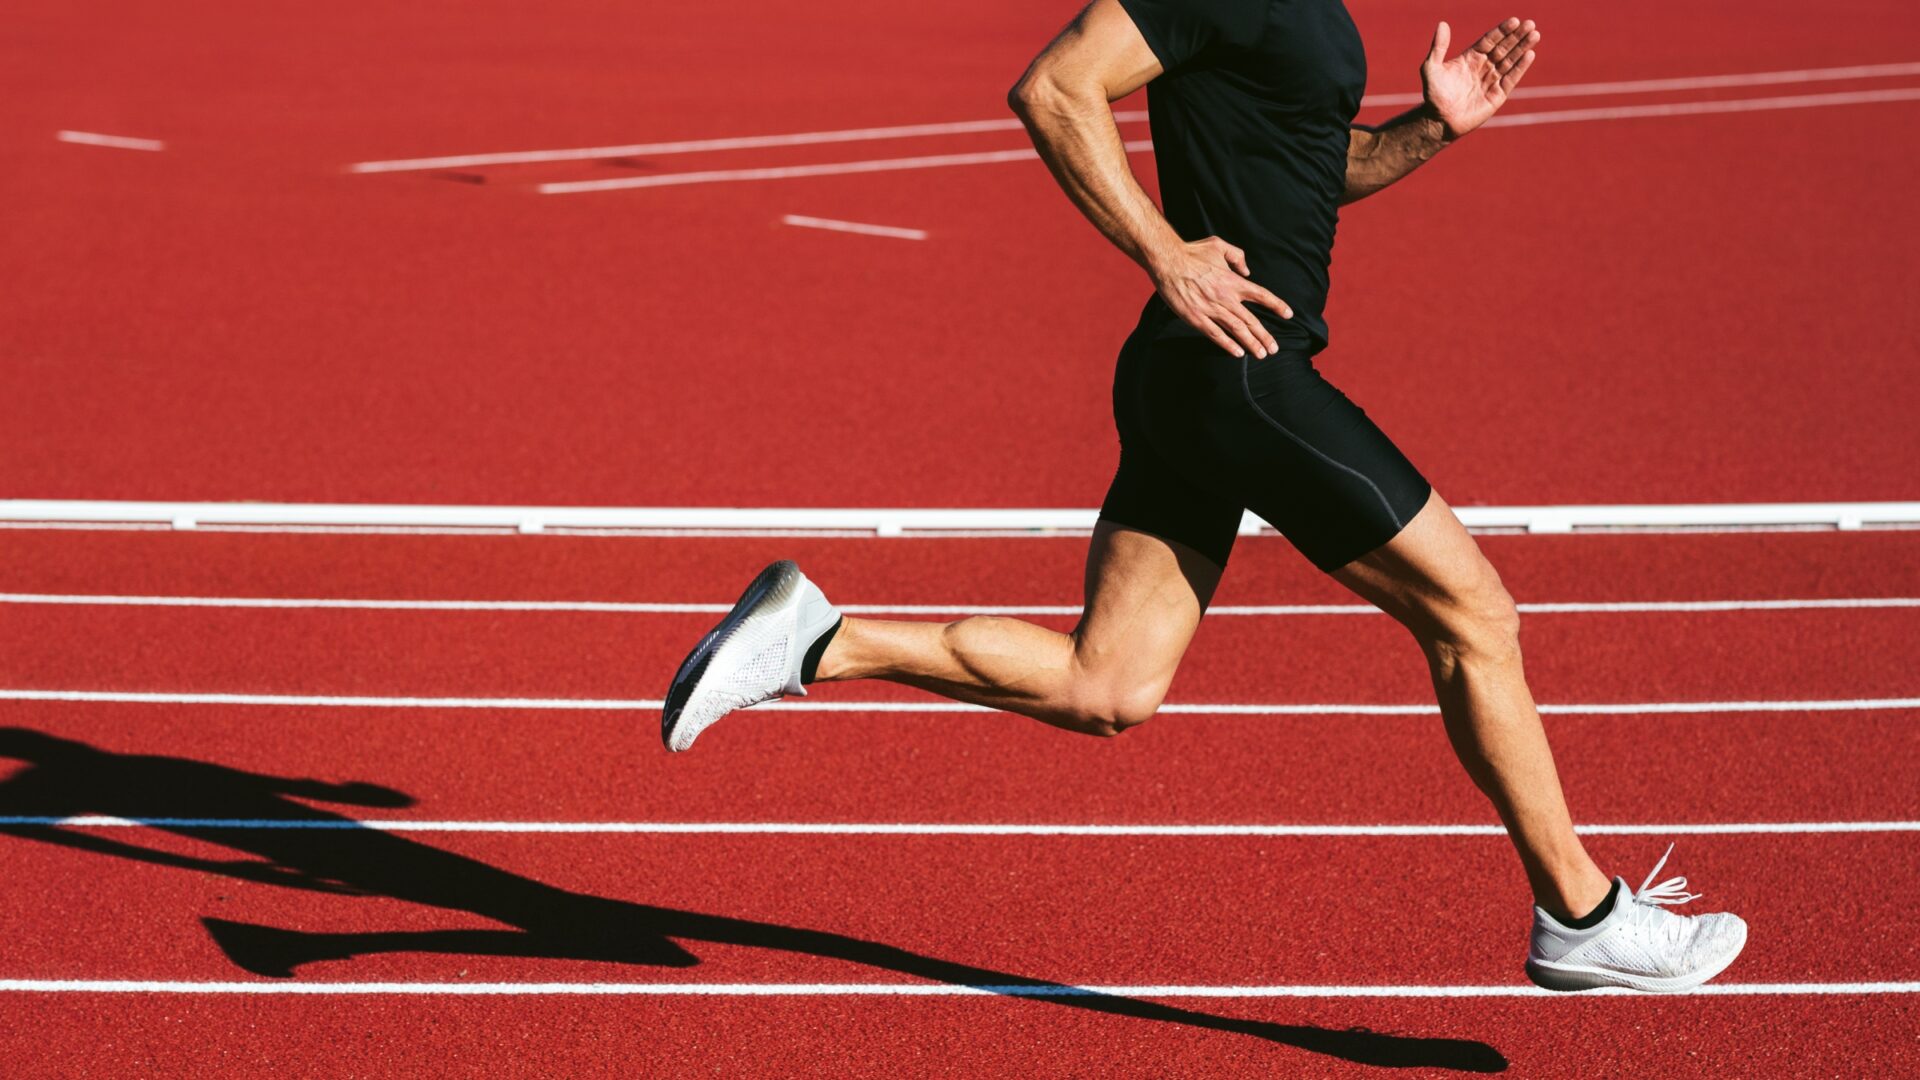 Lower section of a runner sprinting on a red running track